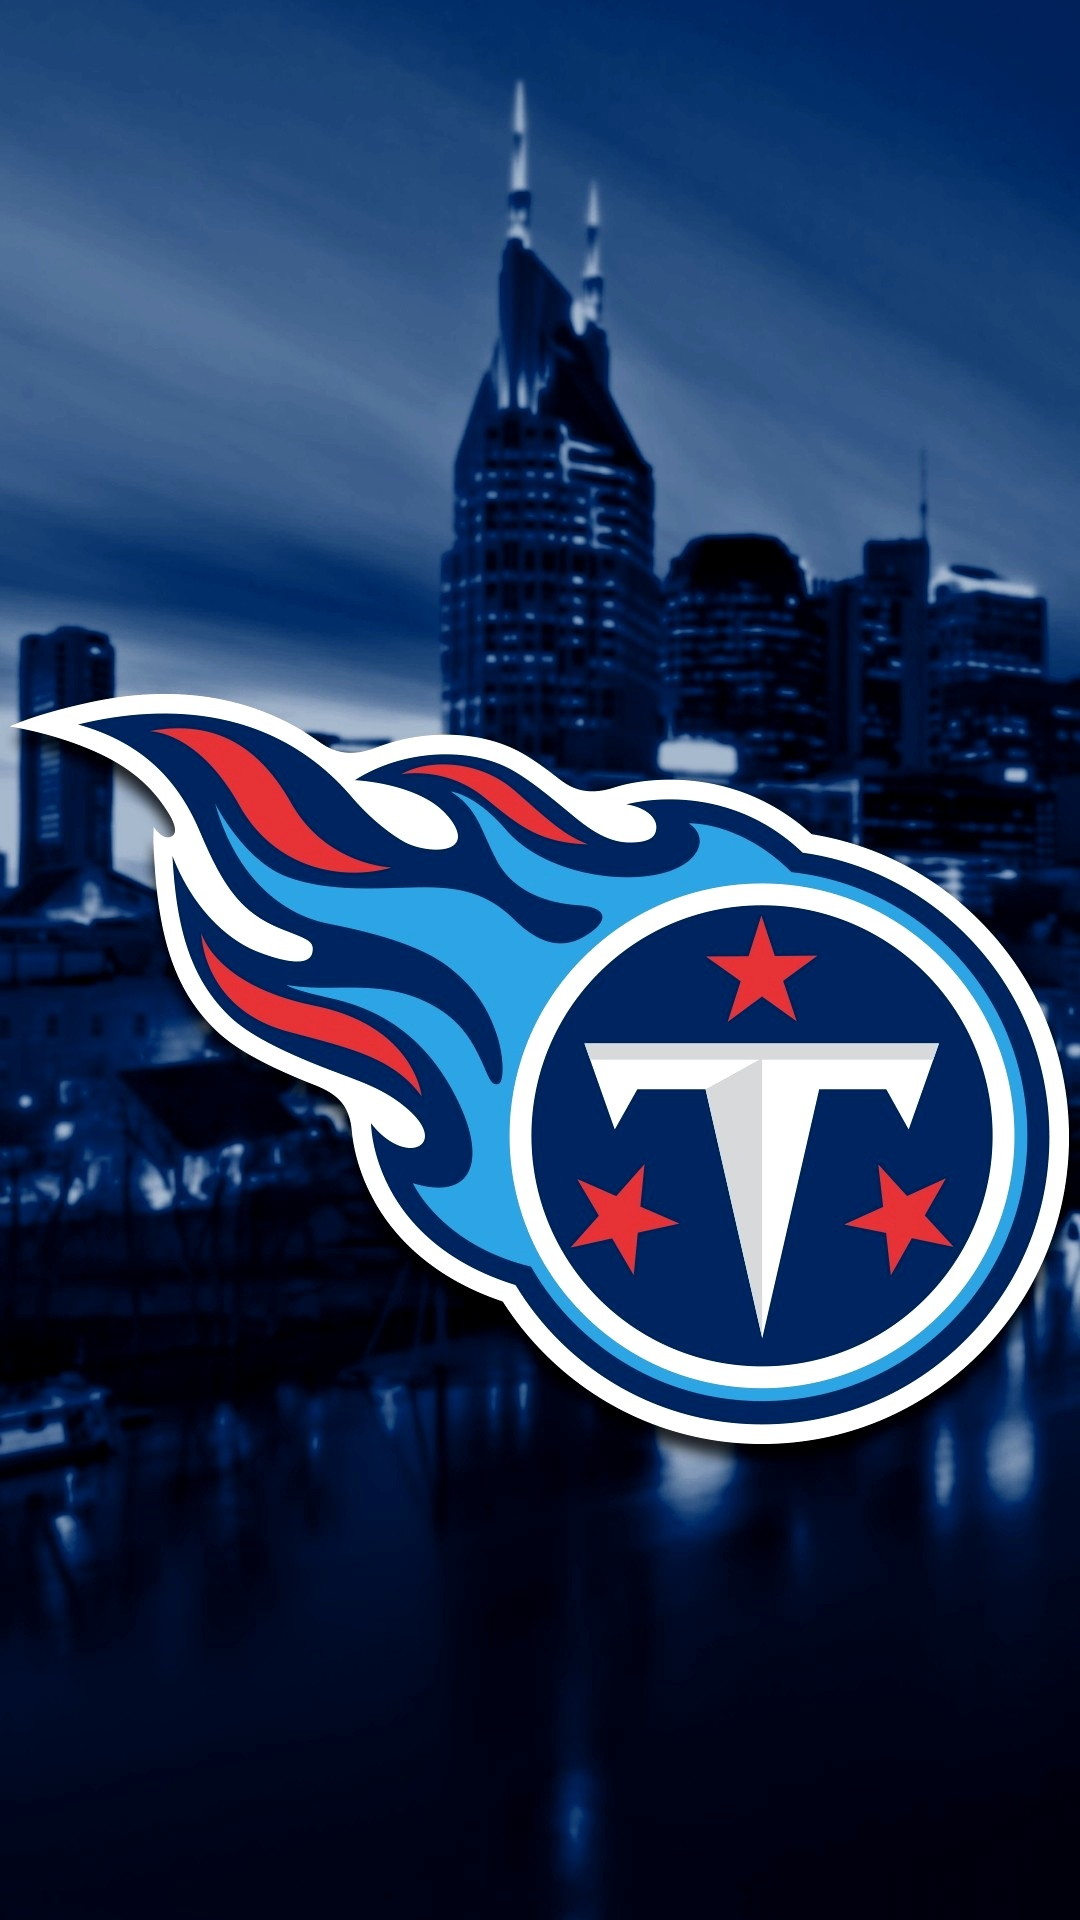 Tennessee Titans Wallpaper For Mobile with high-resolution 1080x1920 pixel. You can use and set as wallpaper for Notebook Screensavers, Mac Wallpapers, Mobile Home Screen, iPhone or Android Phones Lock Screen